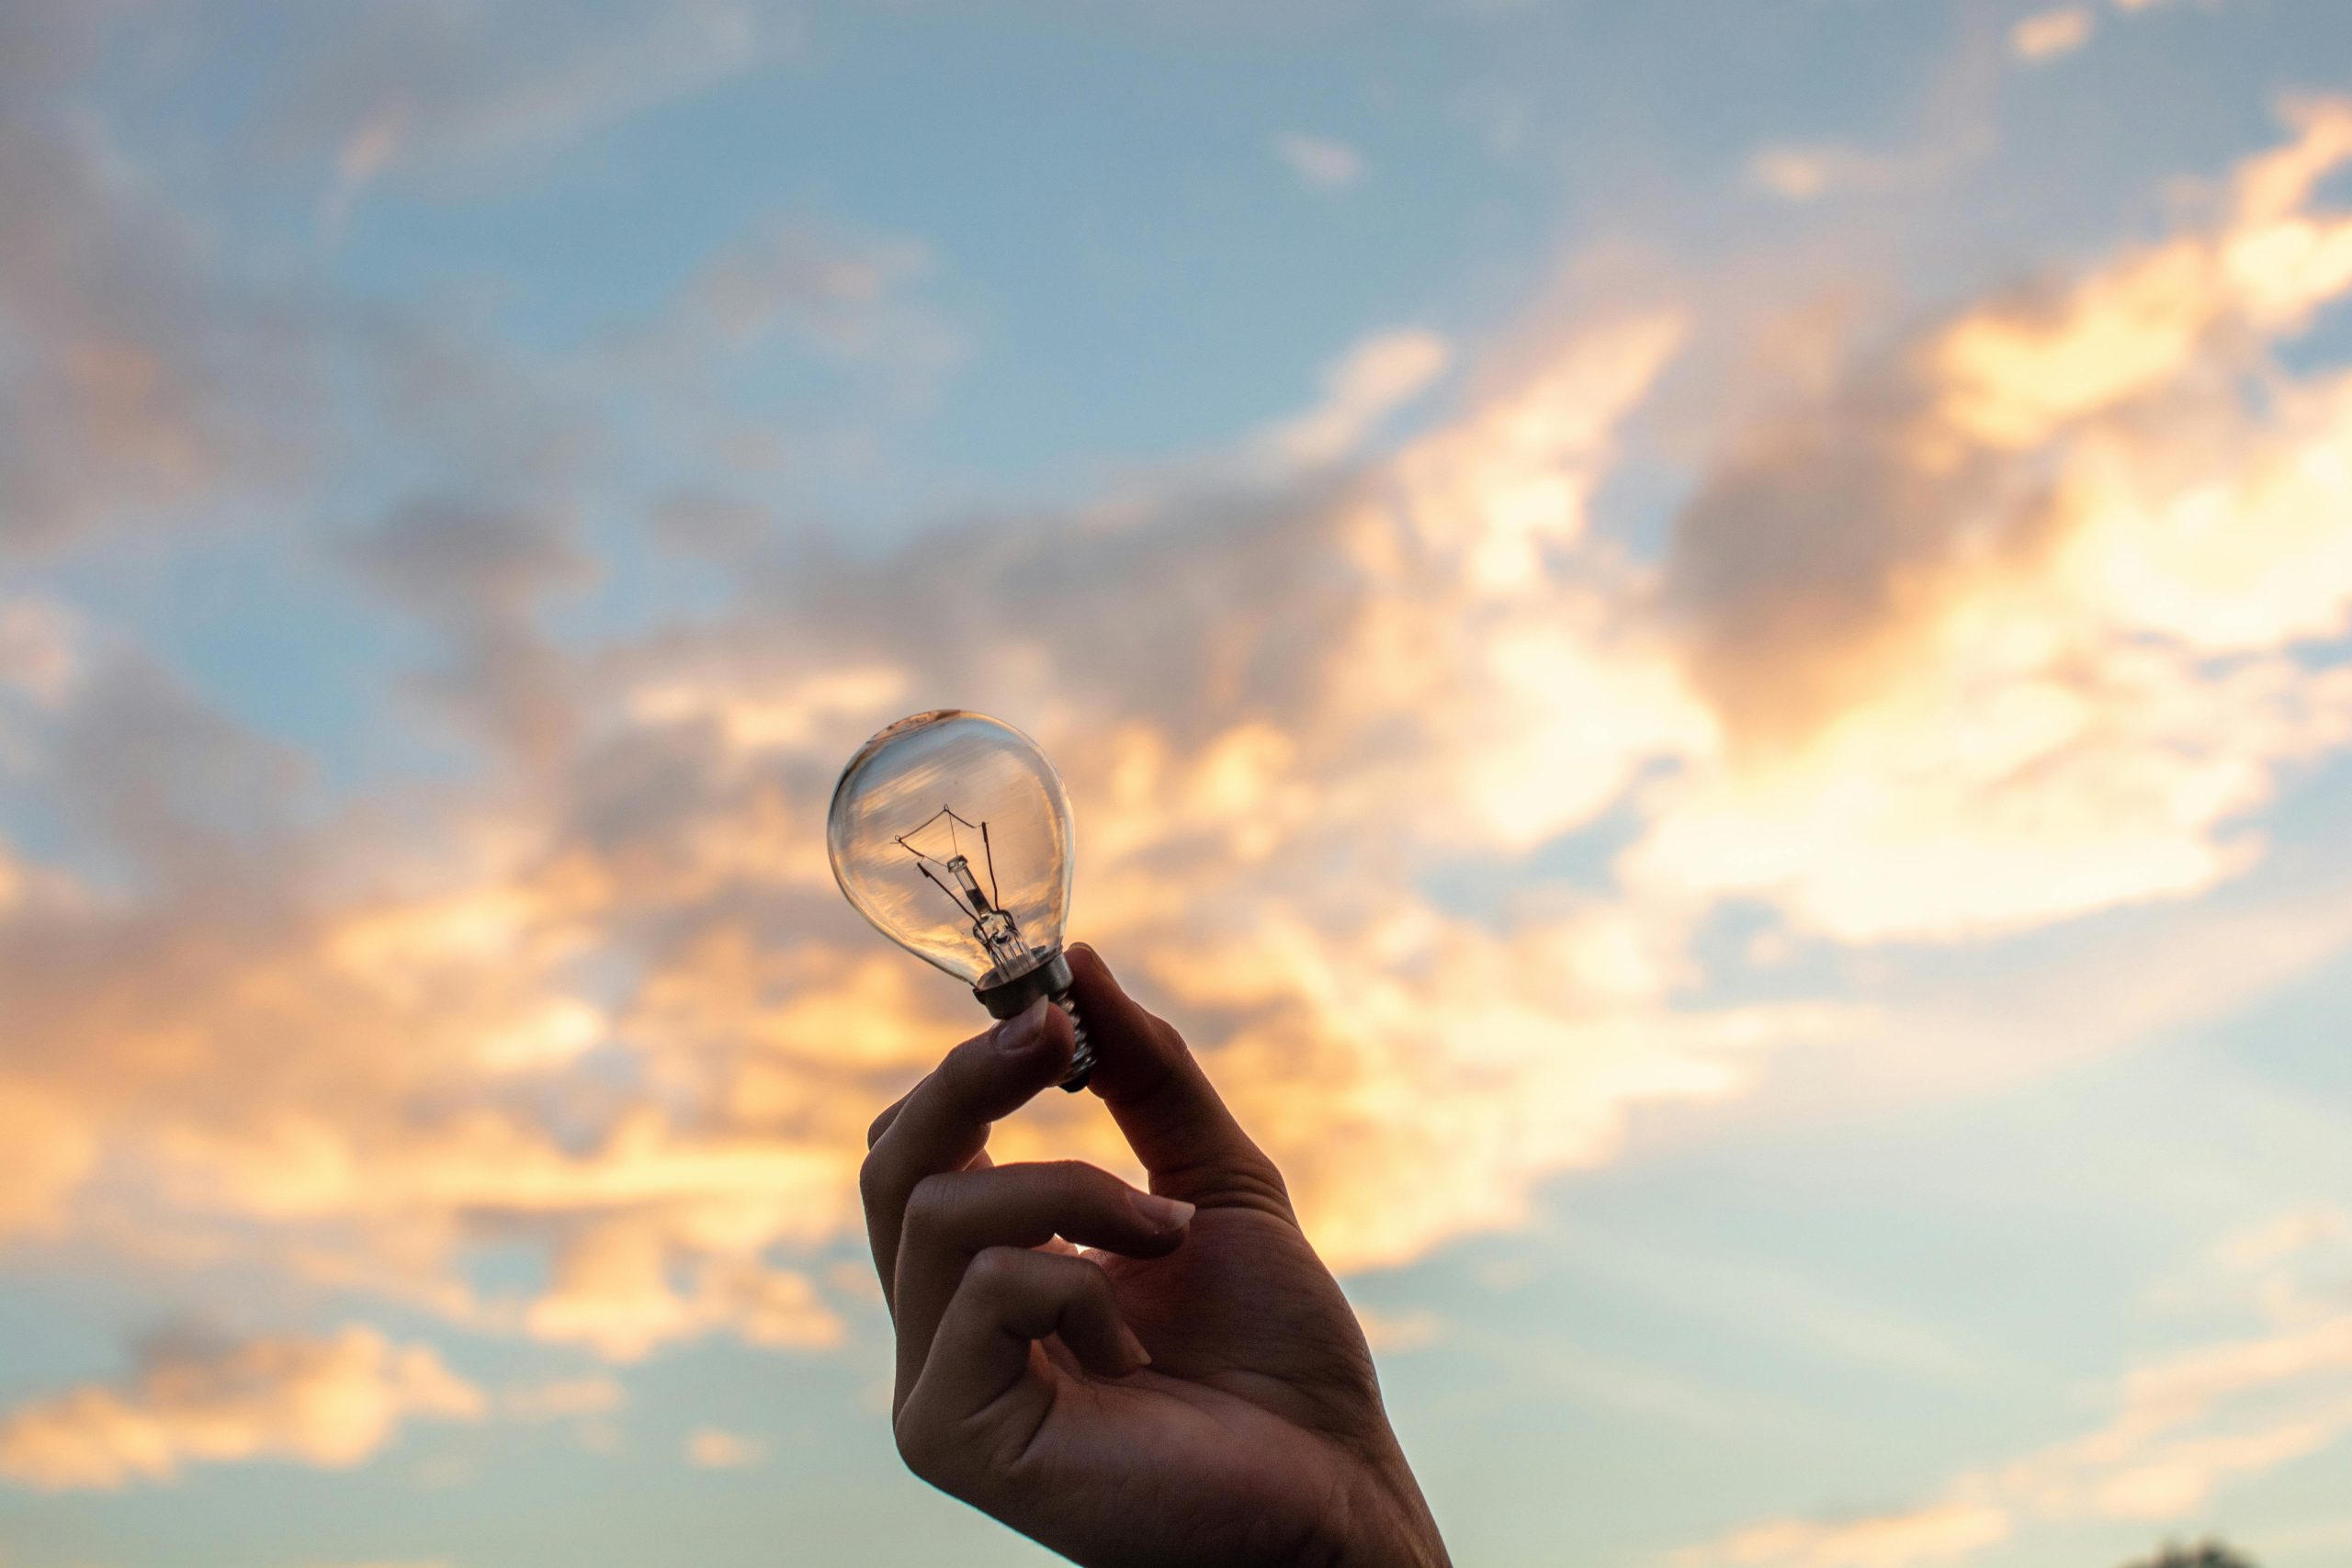 Photo by lil artsy: https://www.pexels.com/photo/person-holding-clear-light-bulb-1314410/